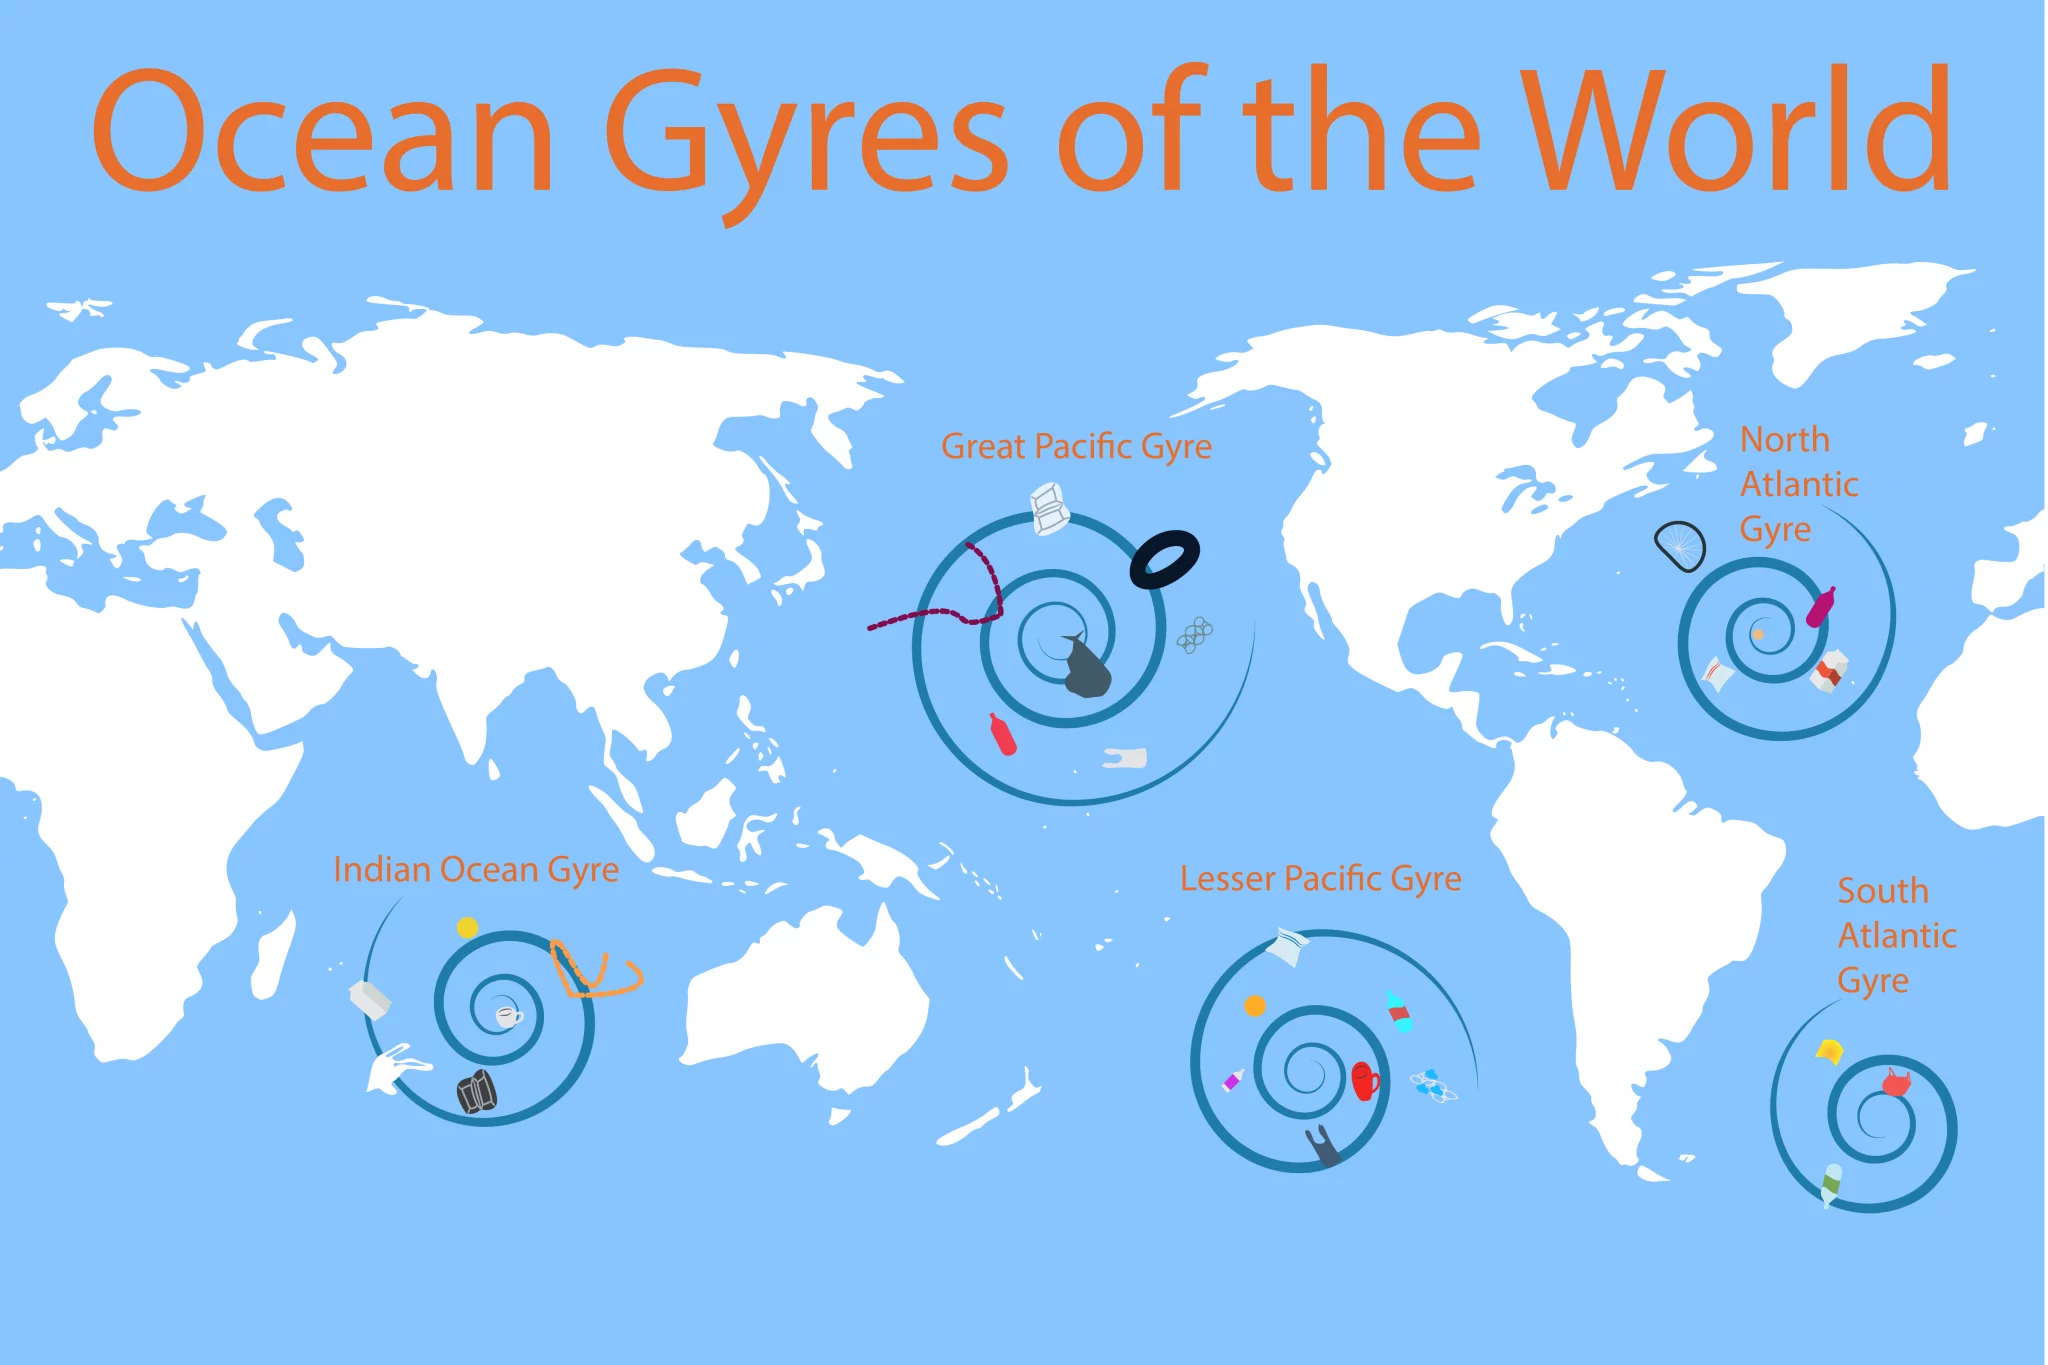 Map of the world's ocean gyres.